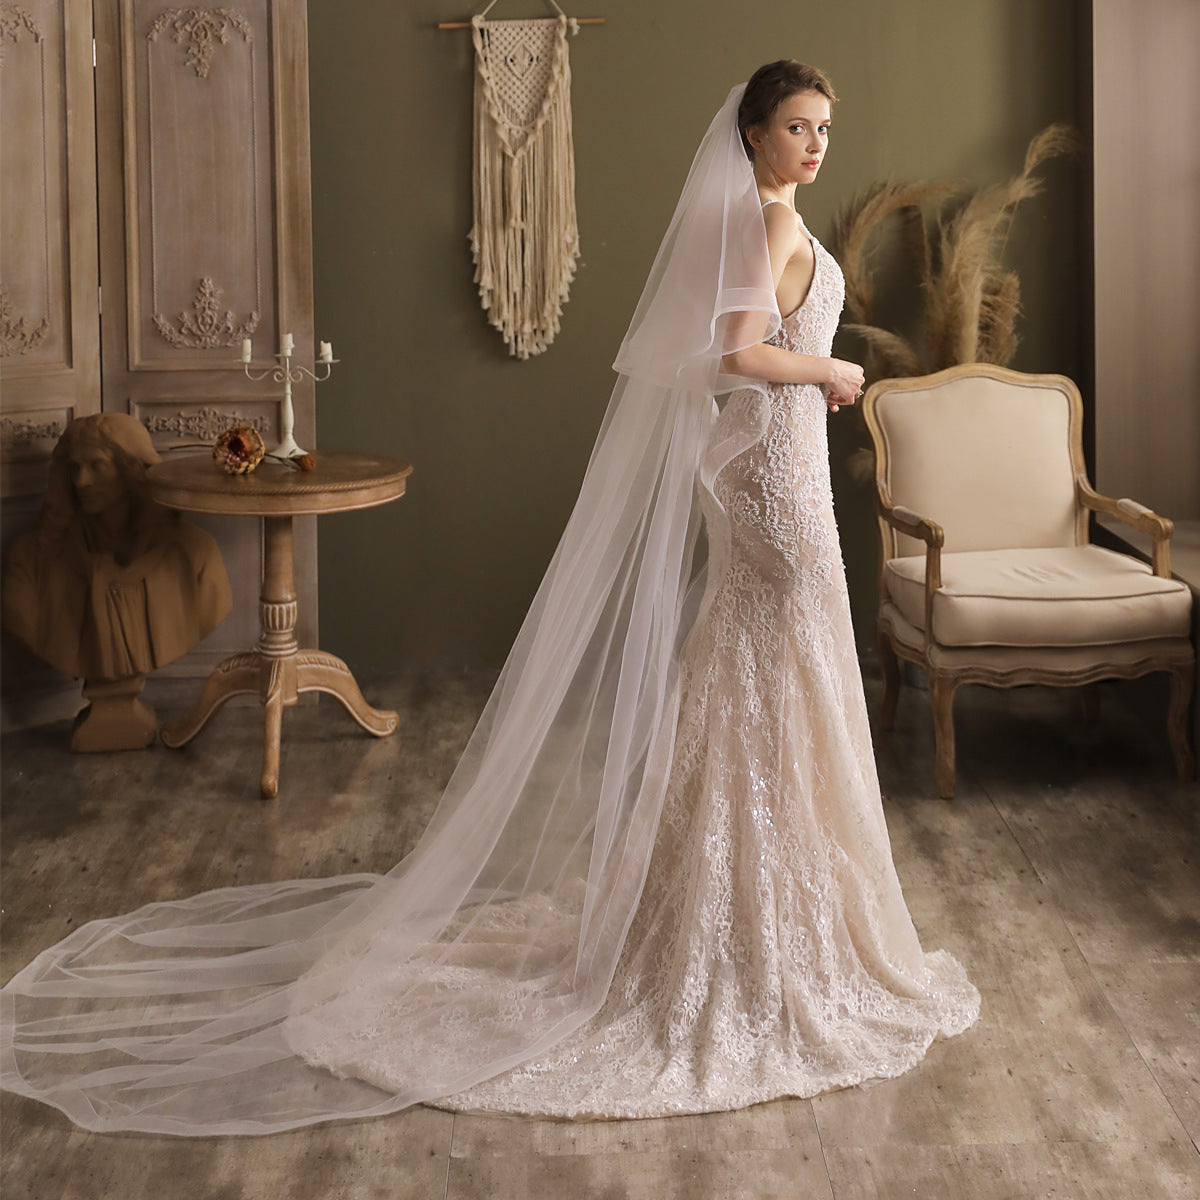 Viniodress Cathedral Veil with Blusher